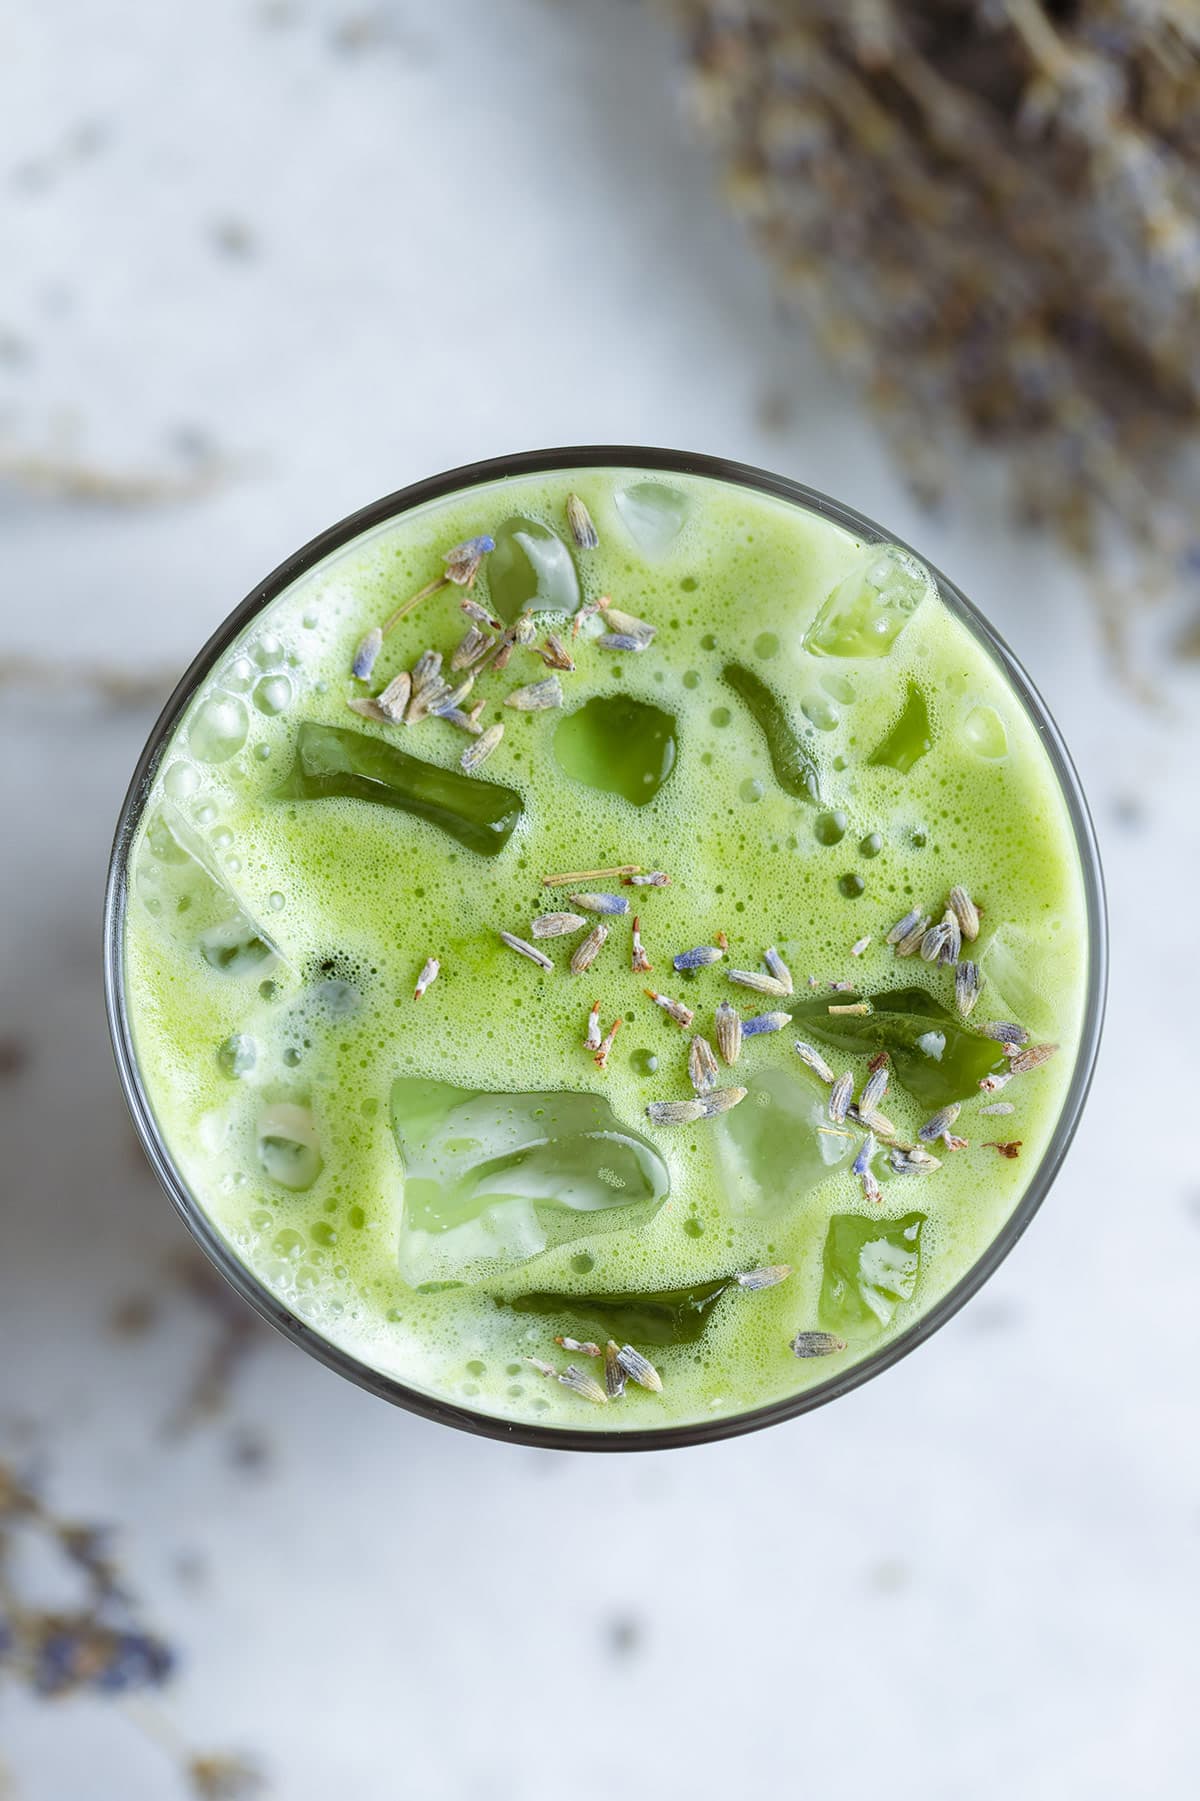 Iced matcha latte in a tall glass sprinkled with dried lavender buds.